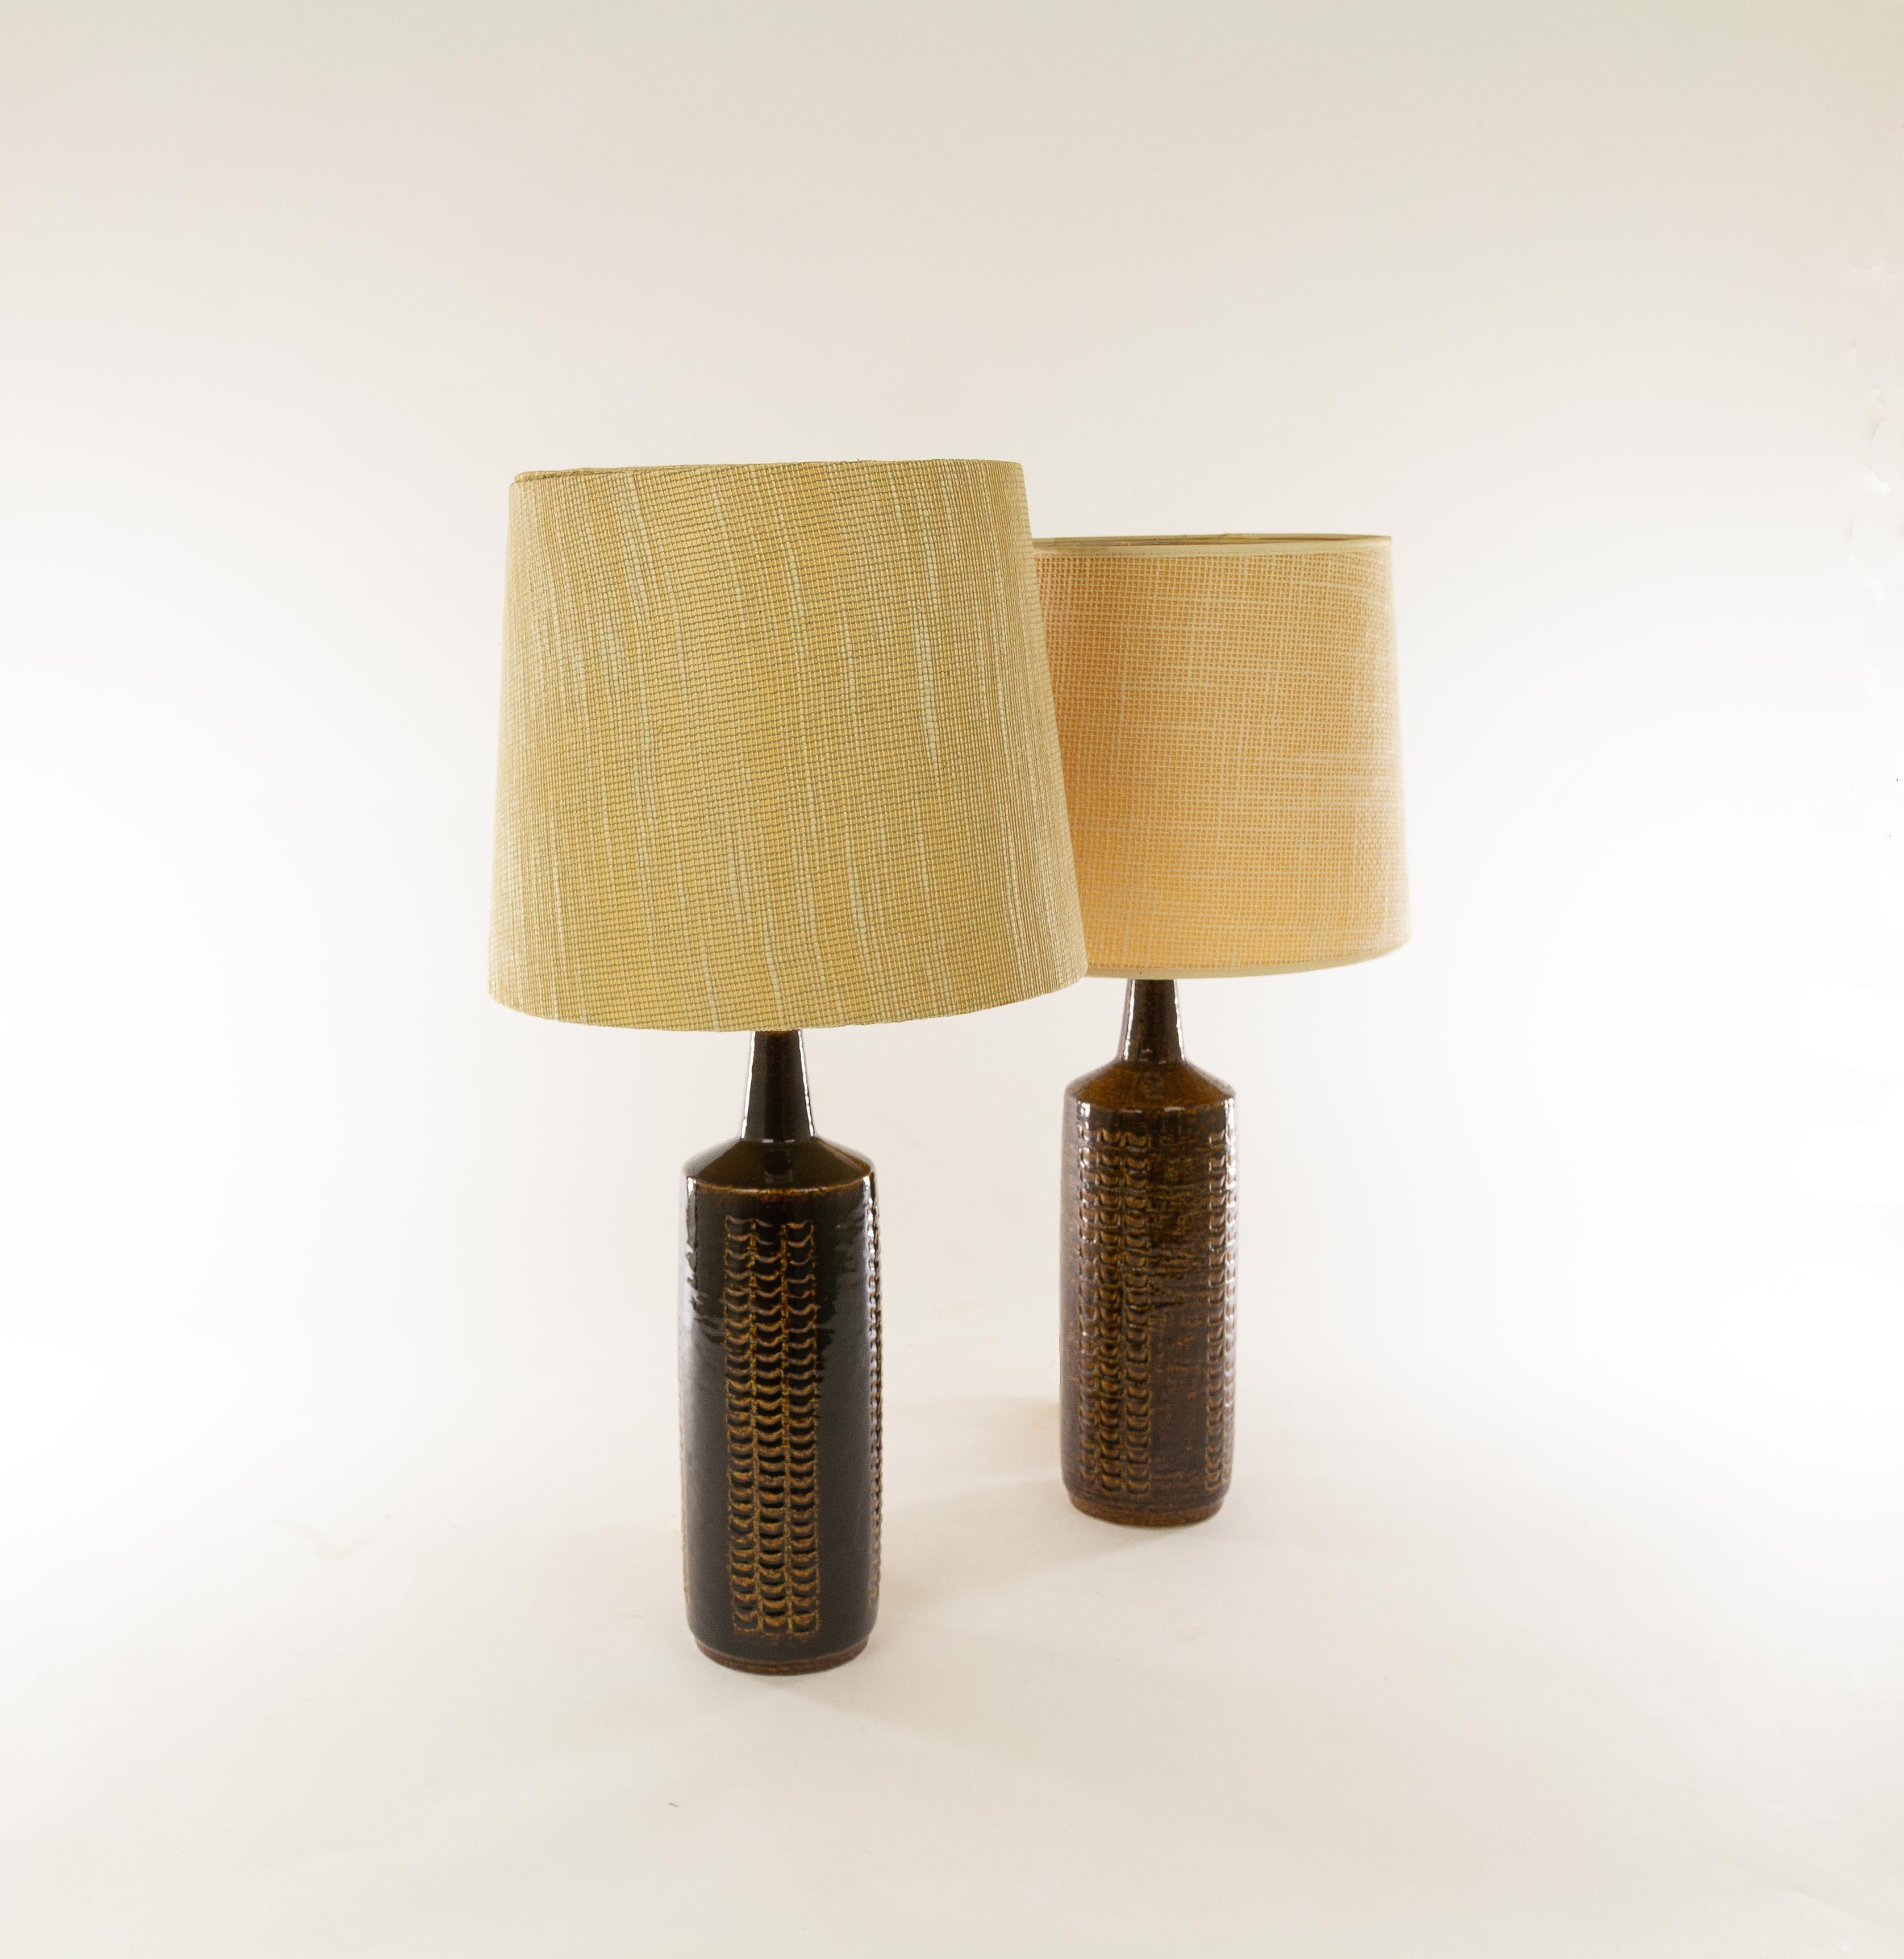 A pair of DL/27 table lamps made by Annelise and Per Linnemann-Schmidt for Palshus in the 1960s. The colour of both pieces is brown.

The lamps come with their original lampshade holders. The lampshades shown are for display purposes only and are